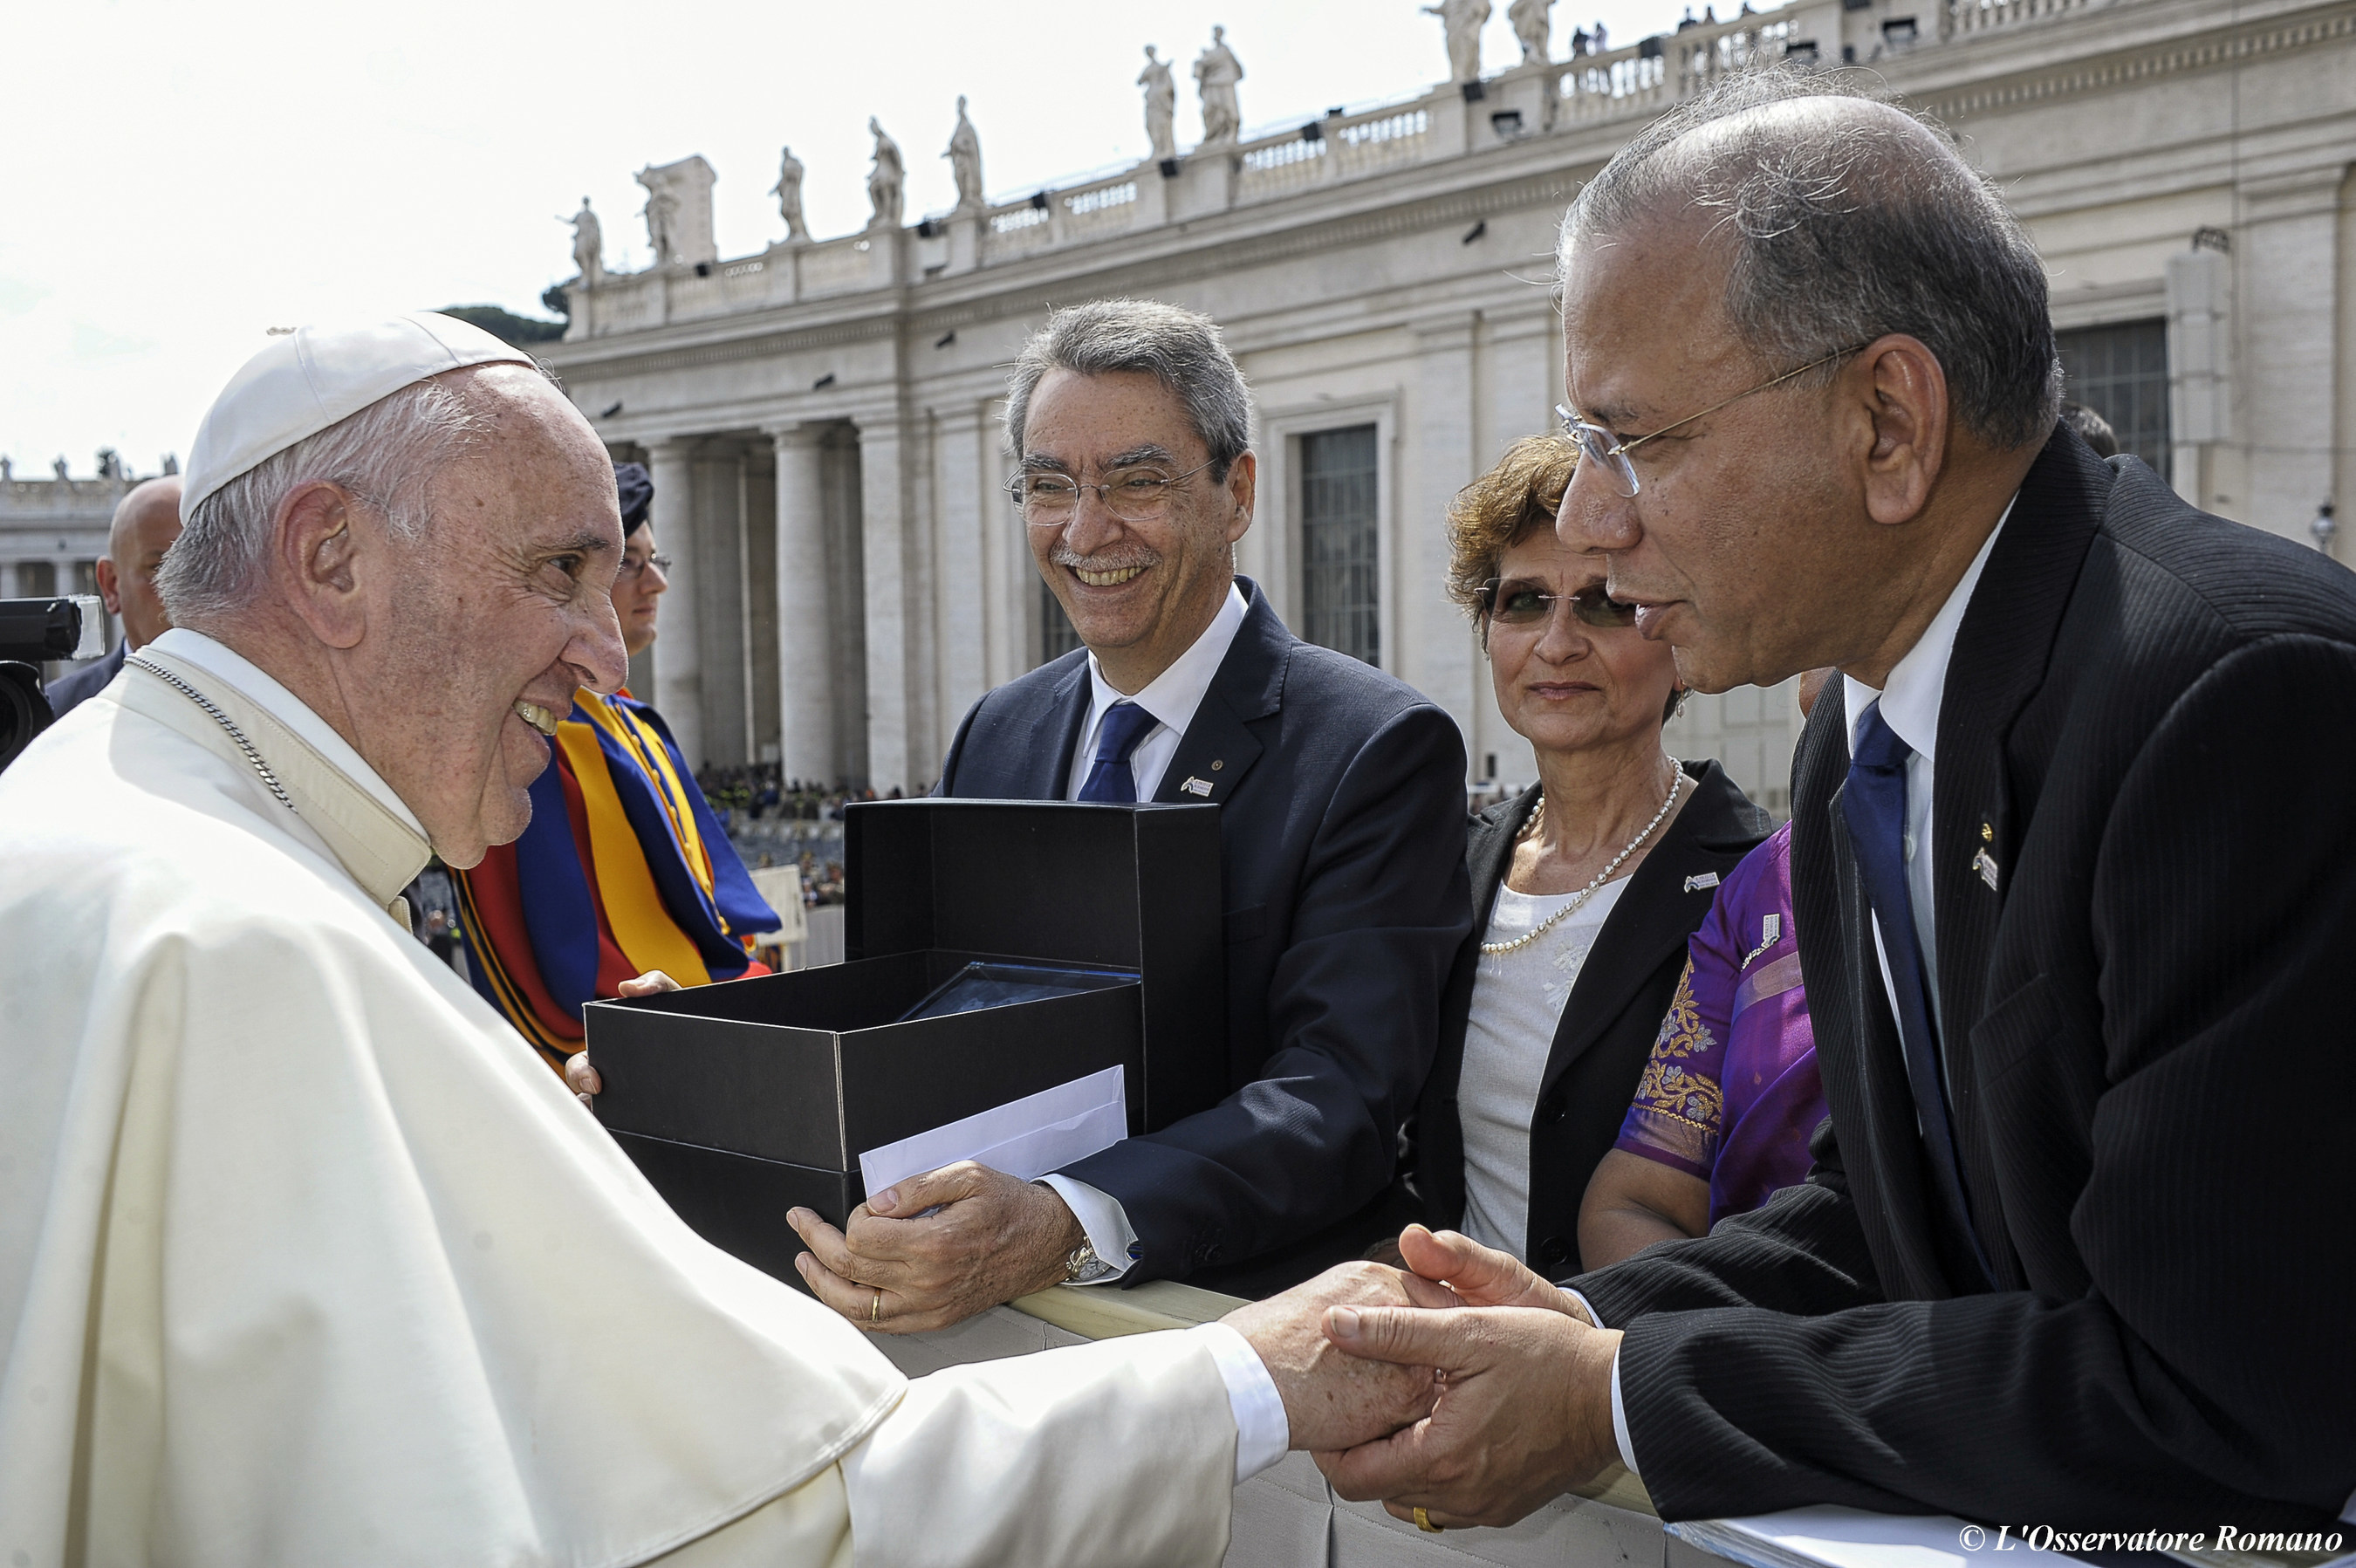 Rotary International President K.R. Ravindran is greeted by Pope Francis following the Jubilee Audience at the Vatican in St. Peter's Square on April 30, 2016. Photo courtesy of the Vatican.